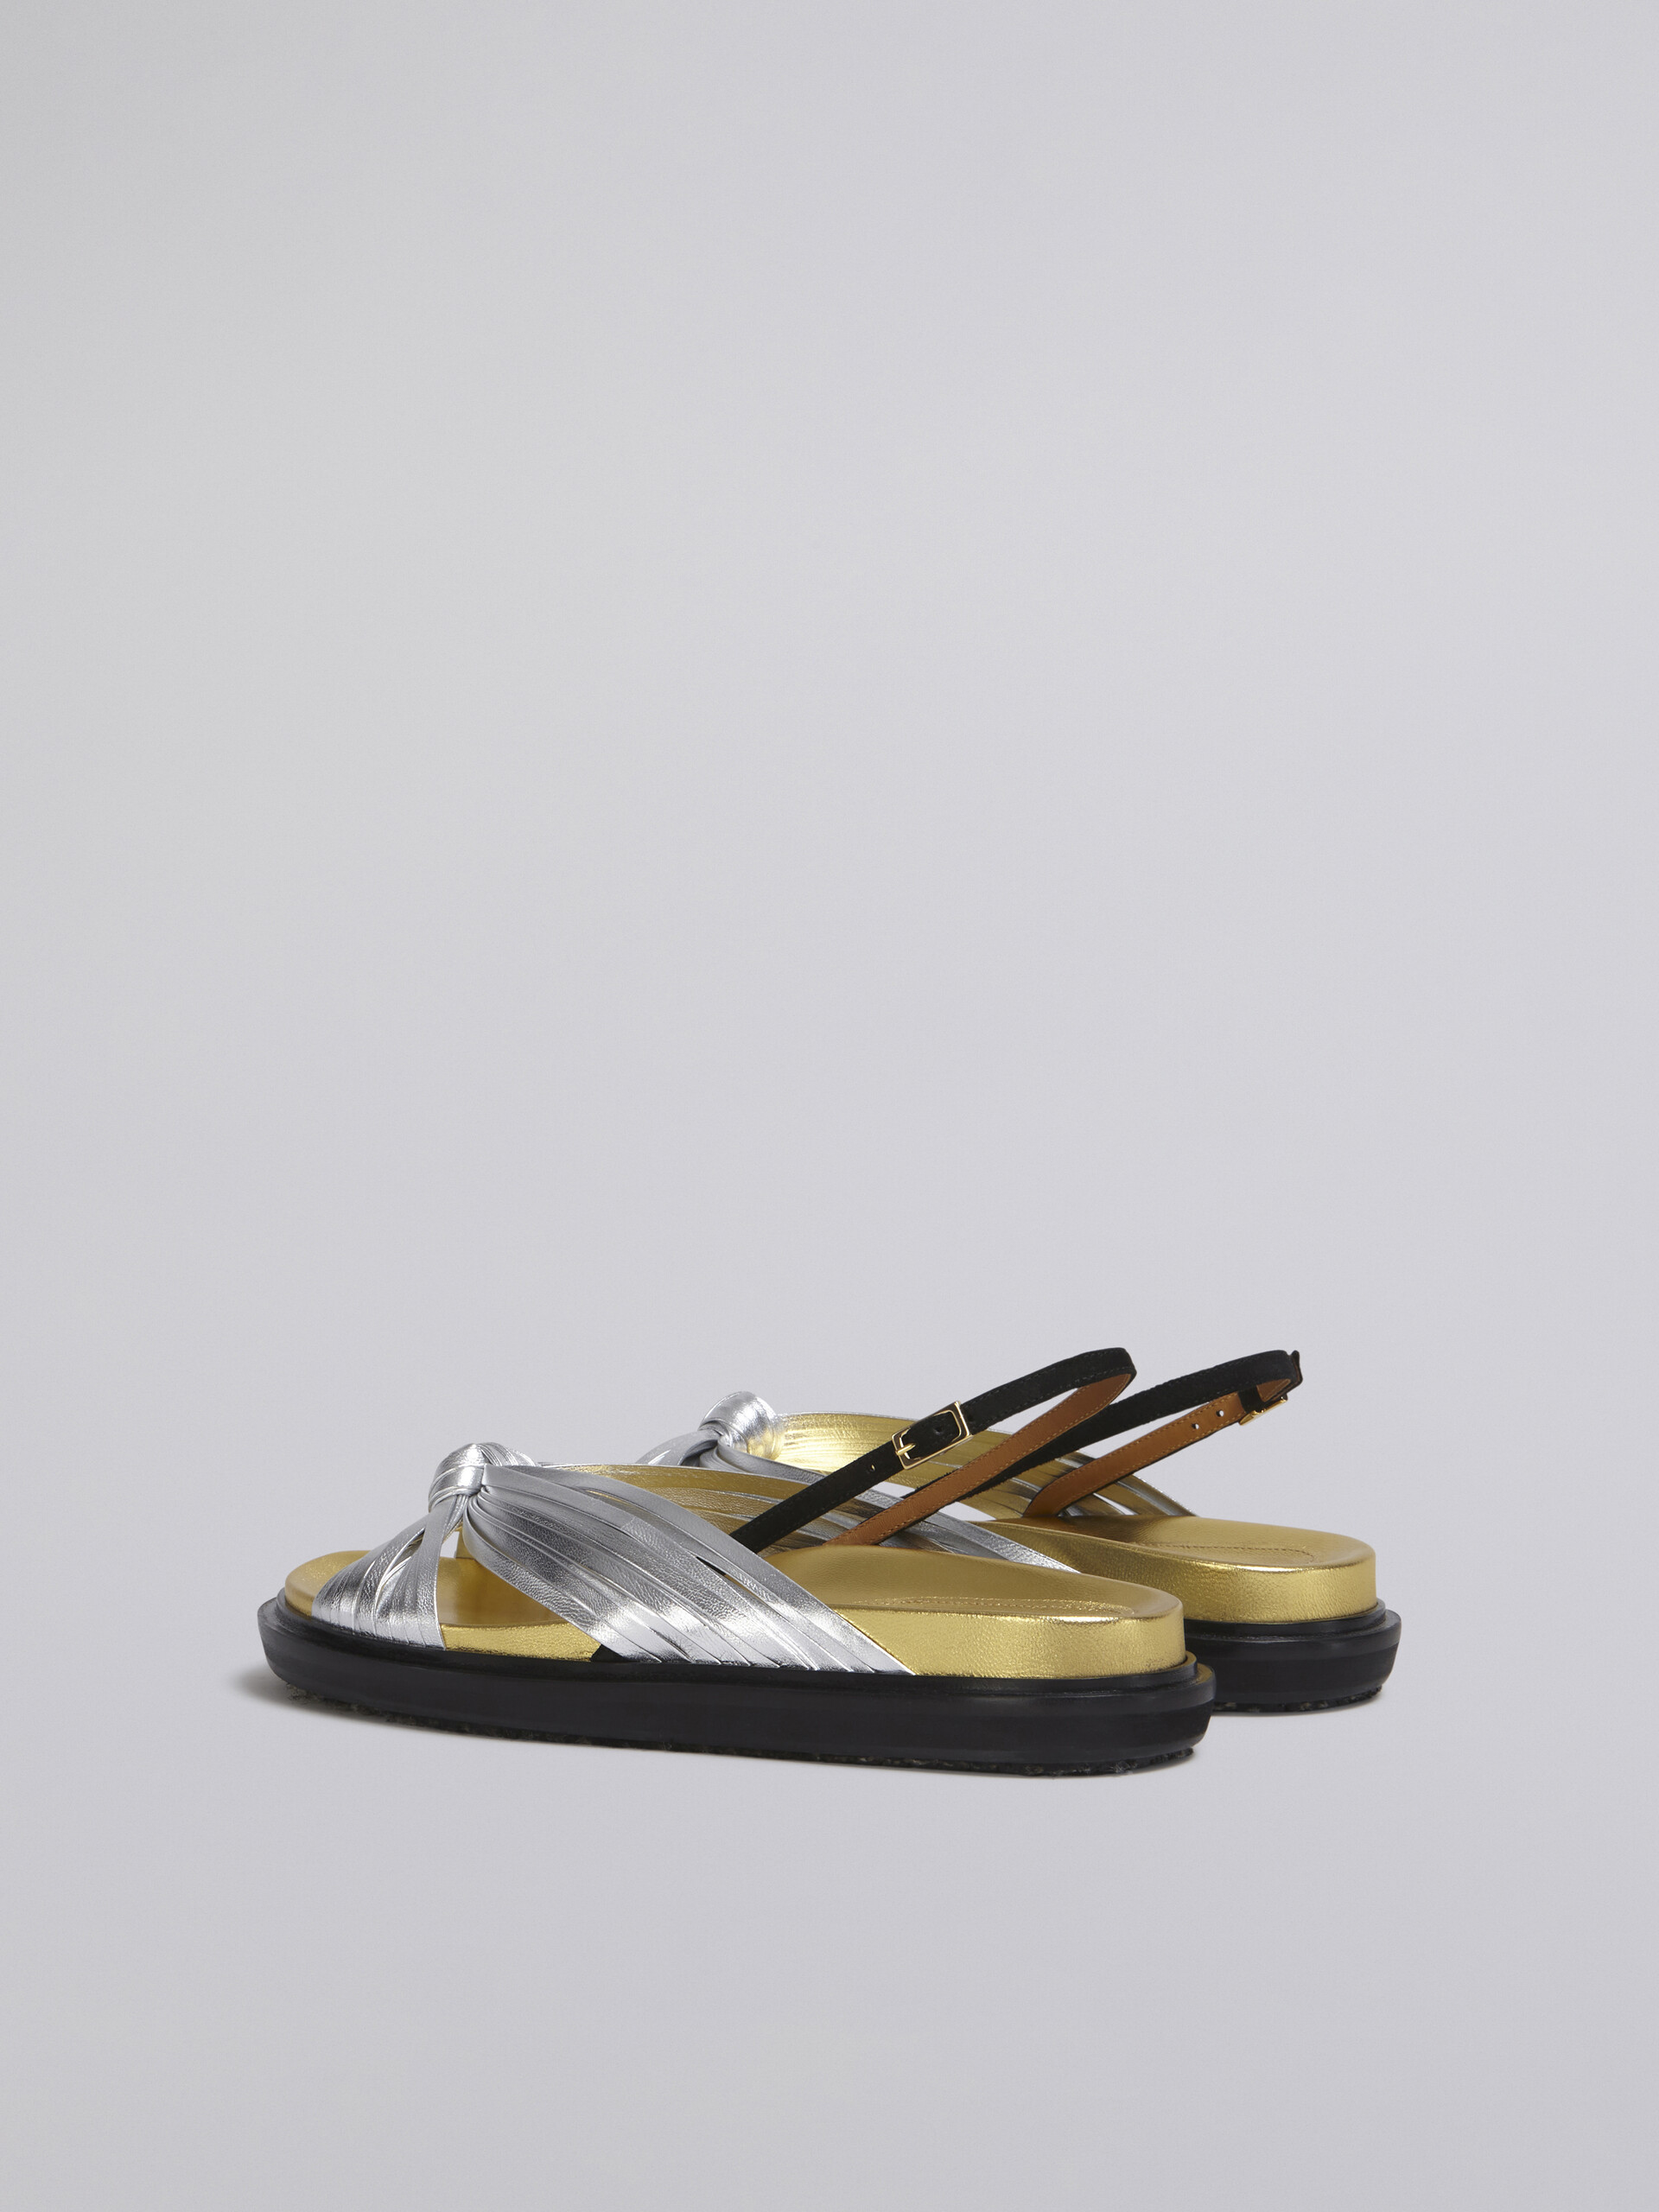 Silver laminated leather Fussbett - Sandals - Image 3